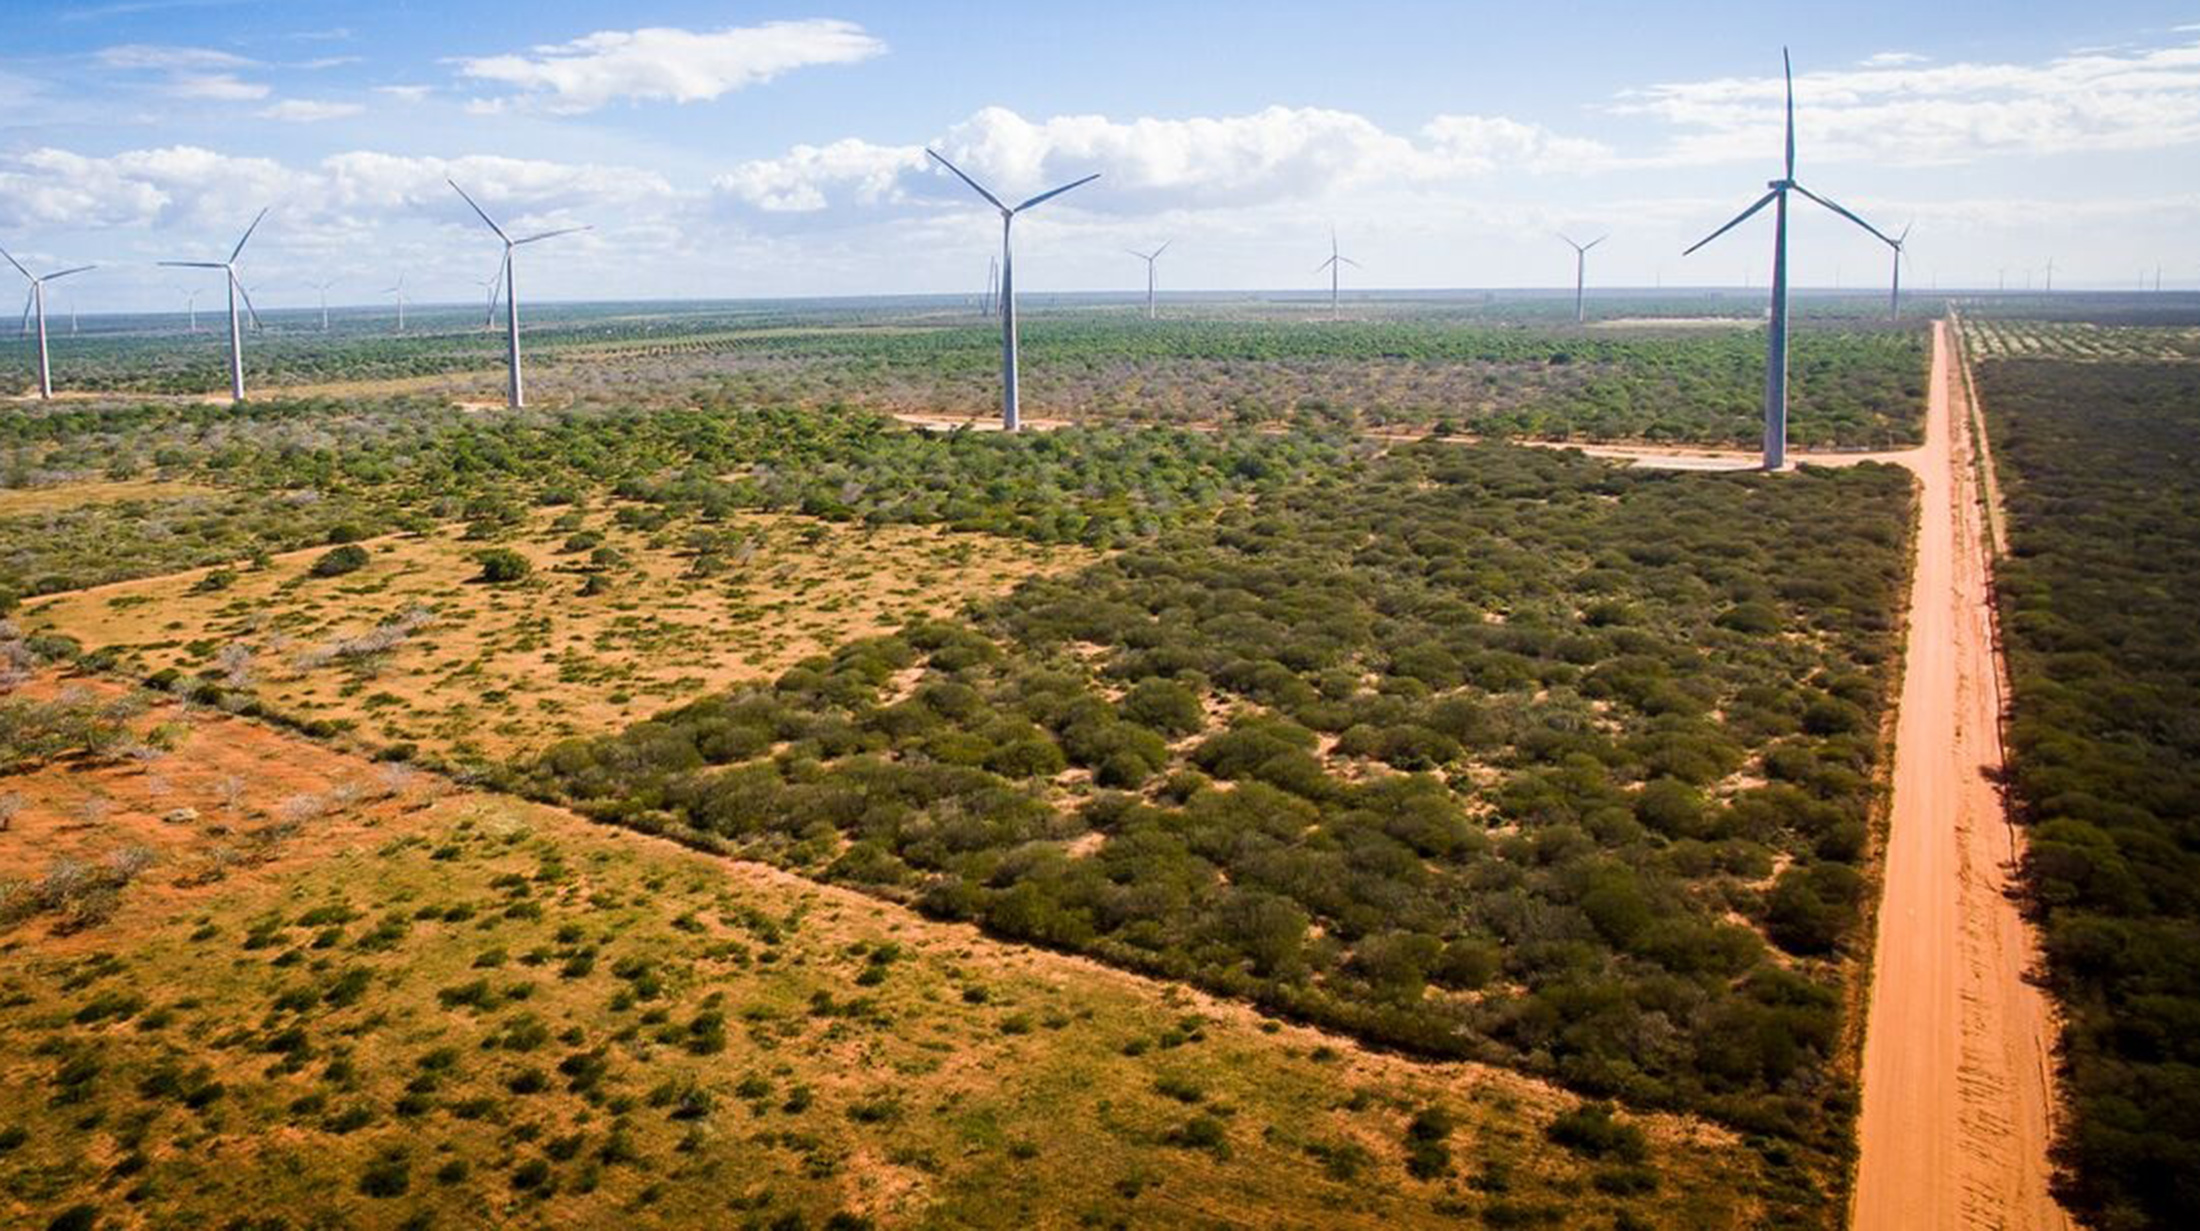 Wind farms in Brazil are encroaching on traditional community land